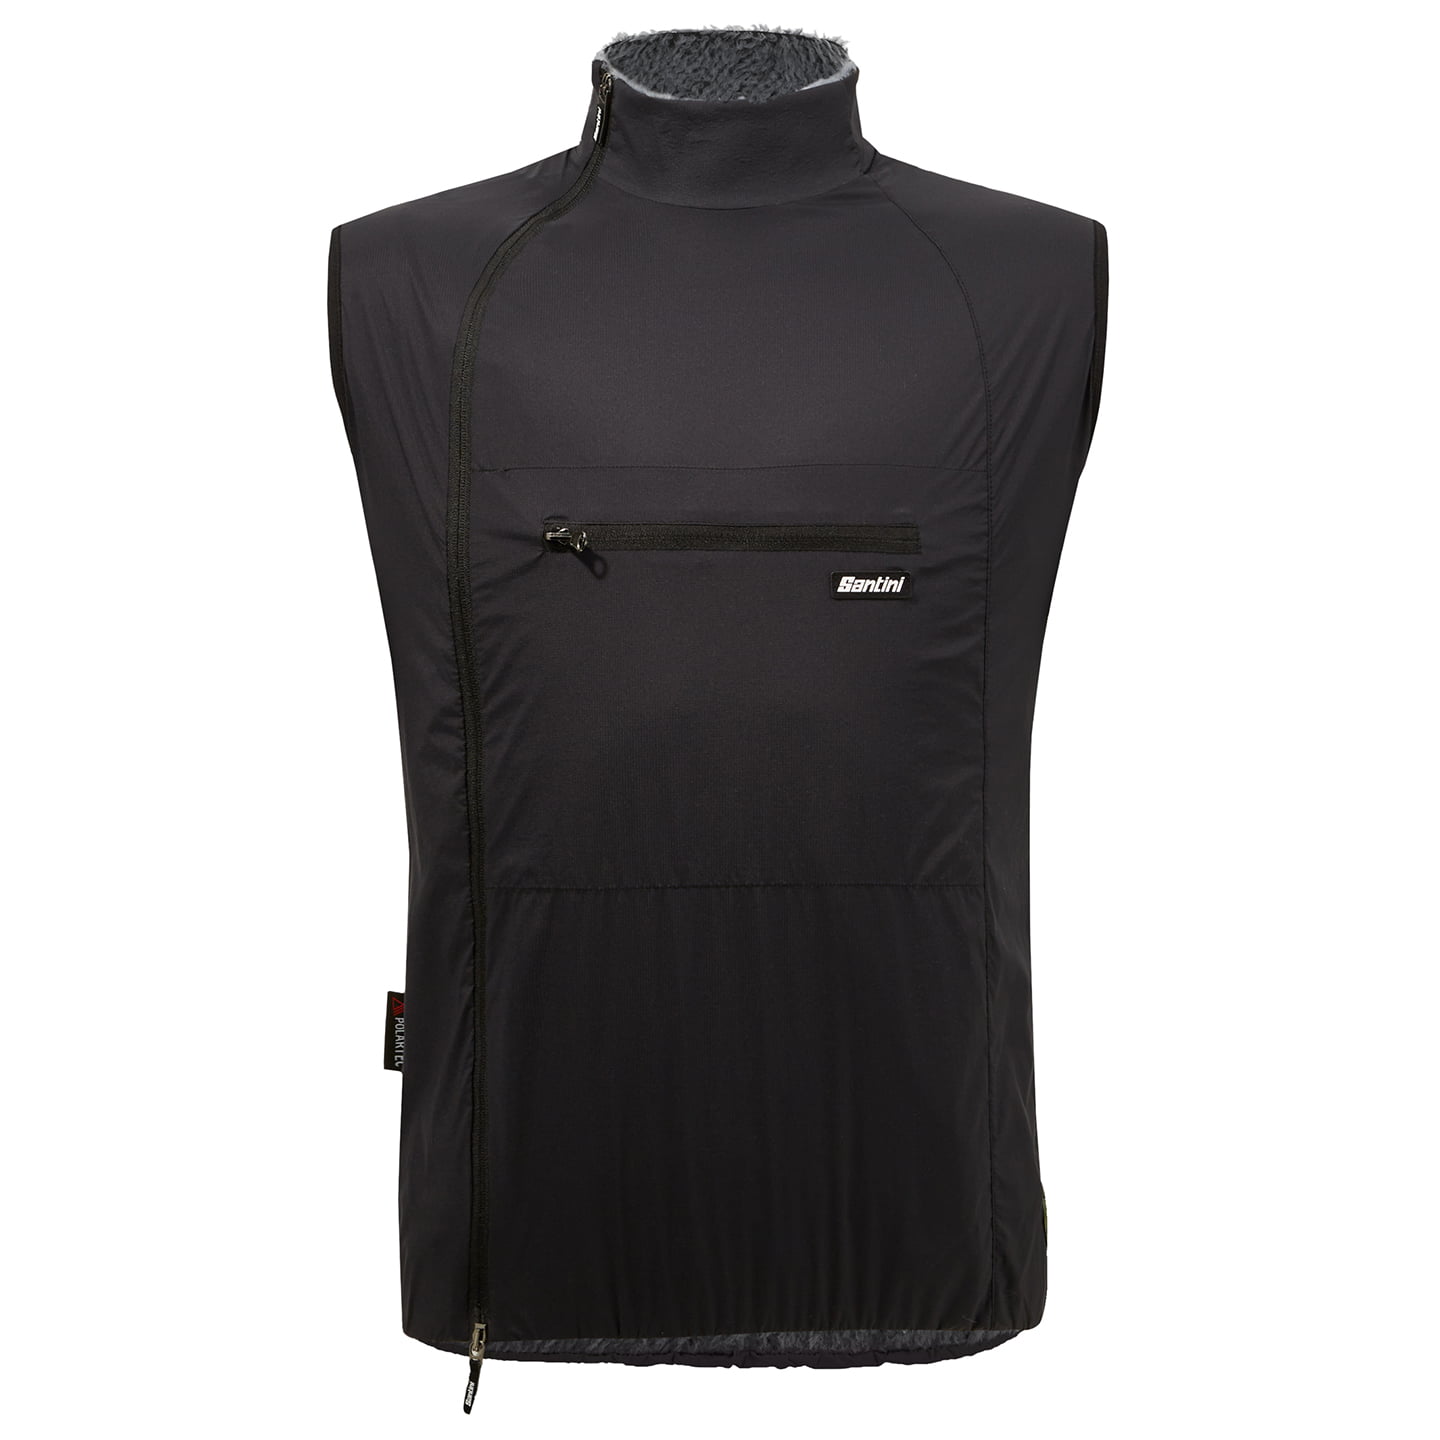 SANTINI Thermal Vests Alpha Pack Wind Vest, for men, size 2XL, Cycling vest, Cycling clothing